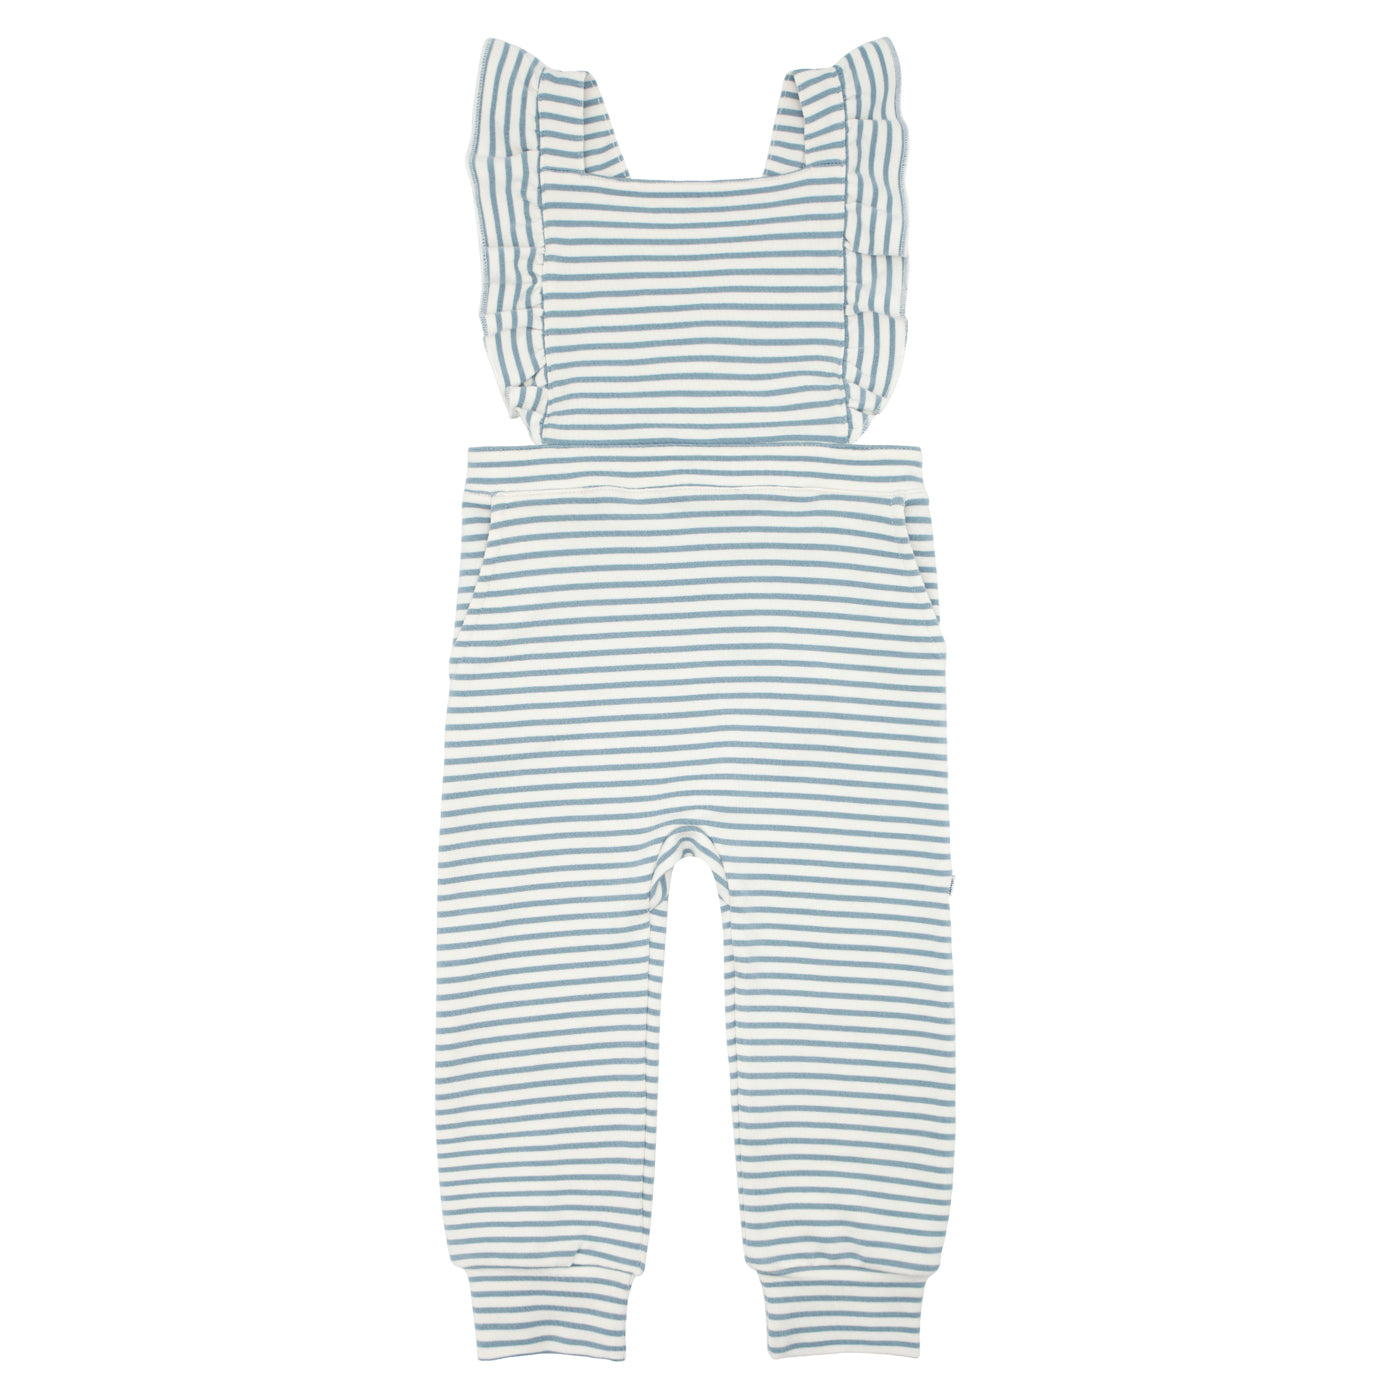 Flat lay image of Ivory and Fog Striped overalls 